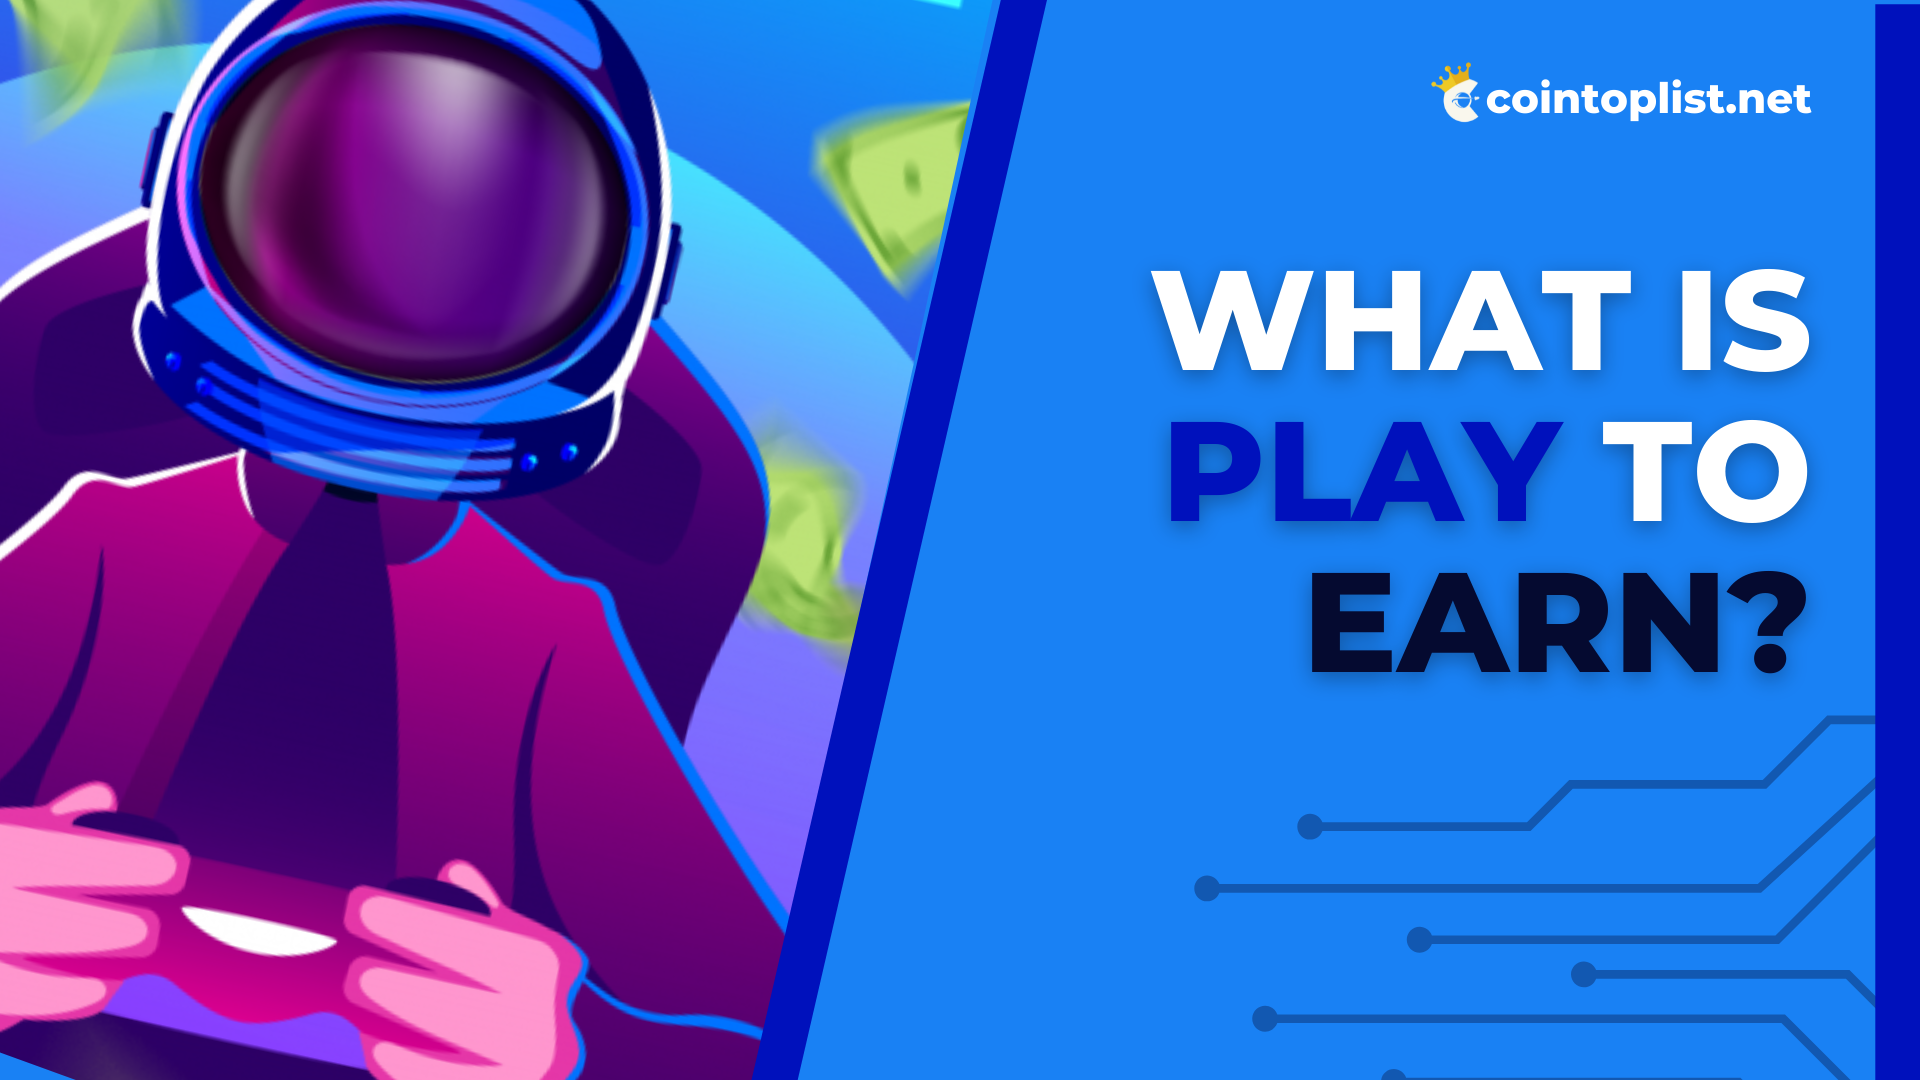 What is Play to Earn and How Does It Earn?